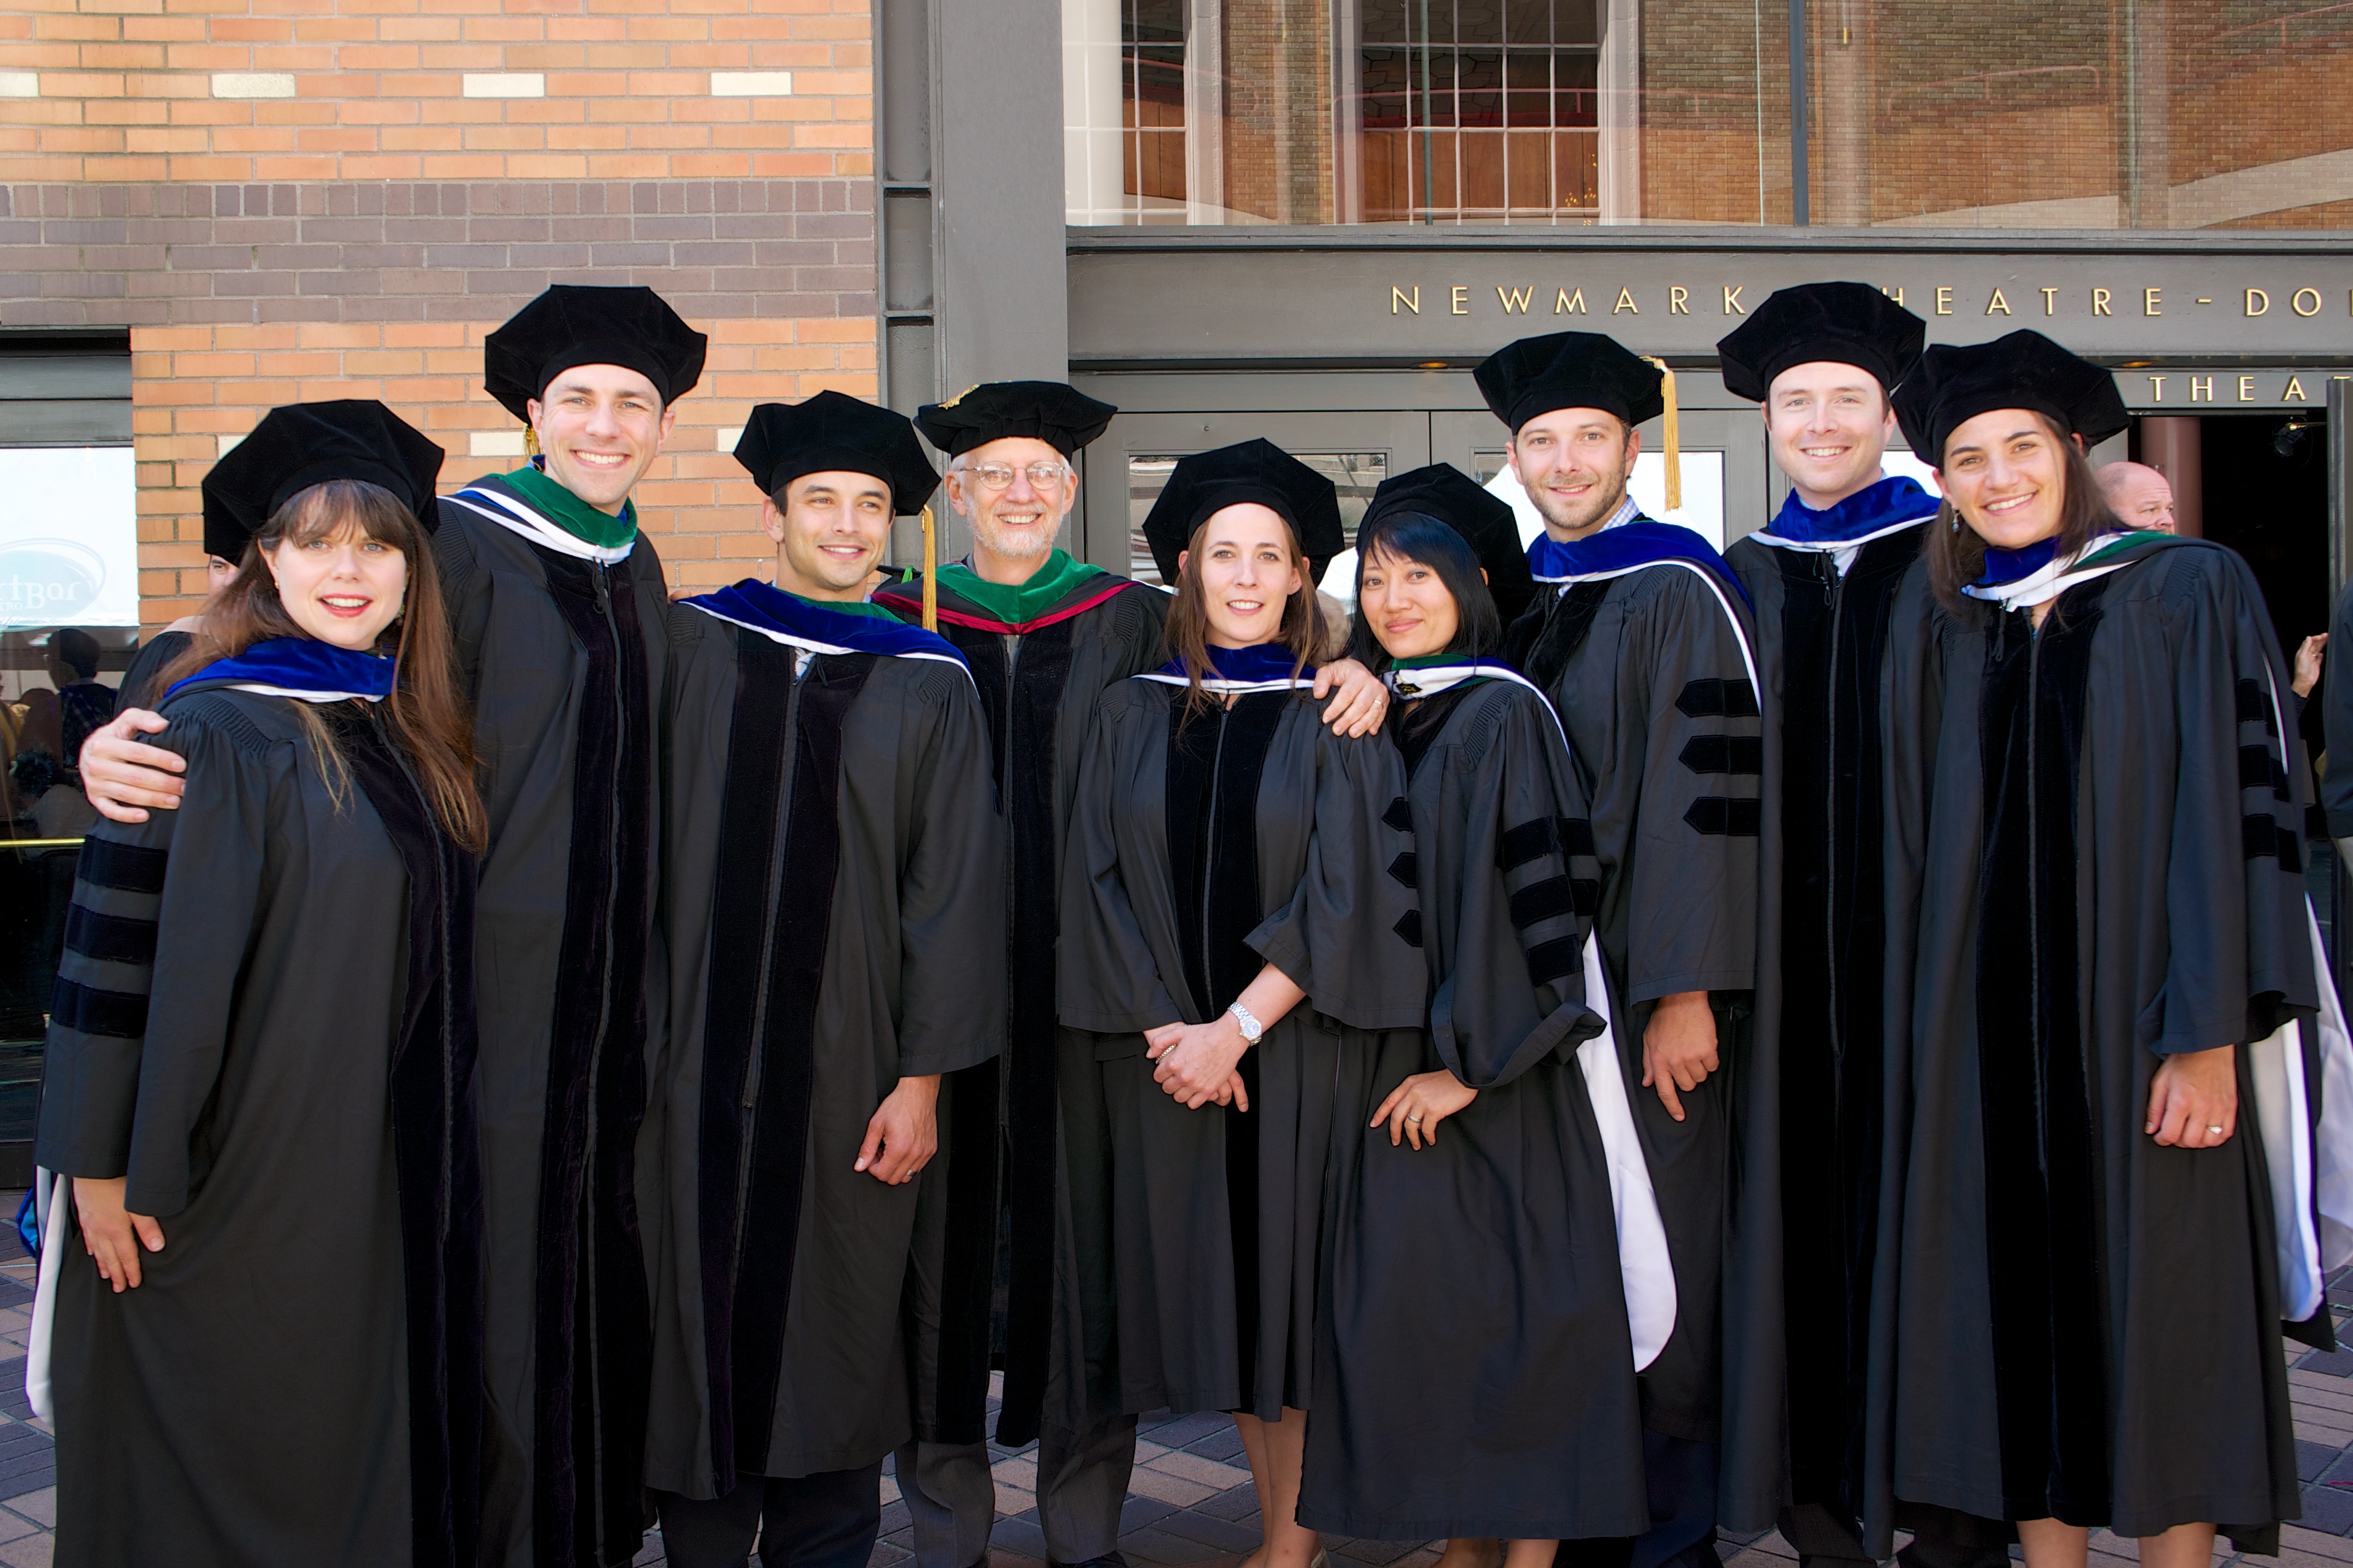 2013 MD/PhD graduates with Dr. Jacoby